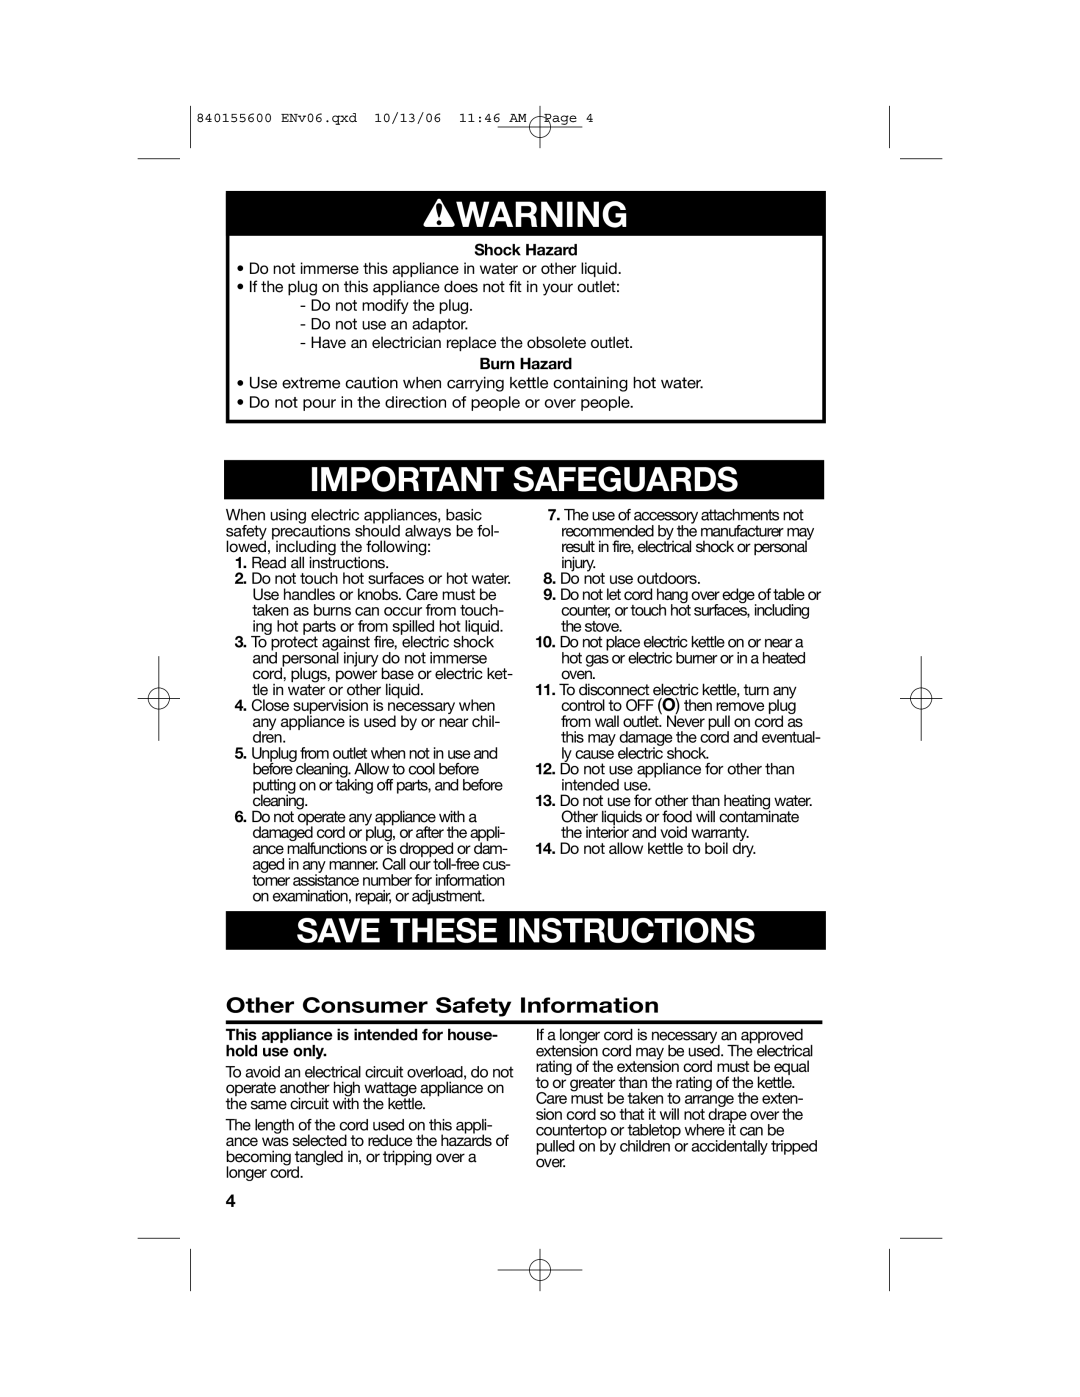 Hamilton Beach 40990 manual wWARNING, Important Safeguards, Save These Instructions, Other Consumer Safety Information 